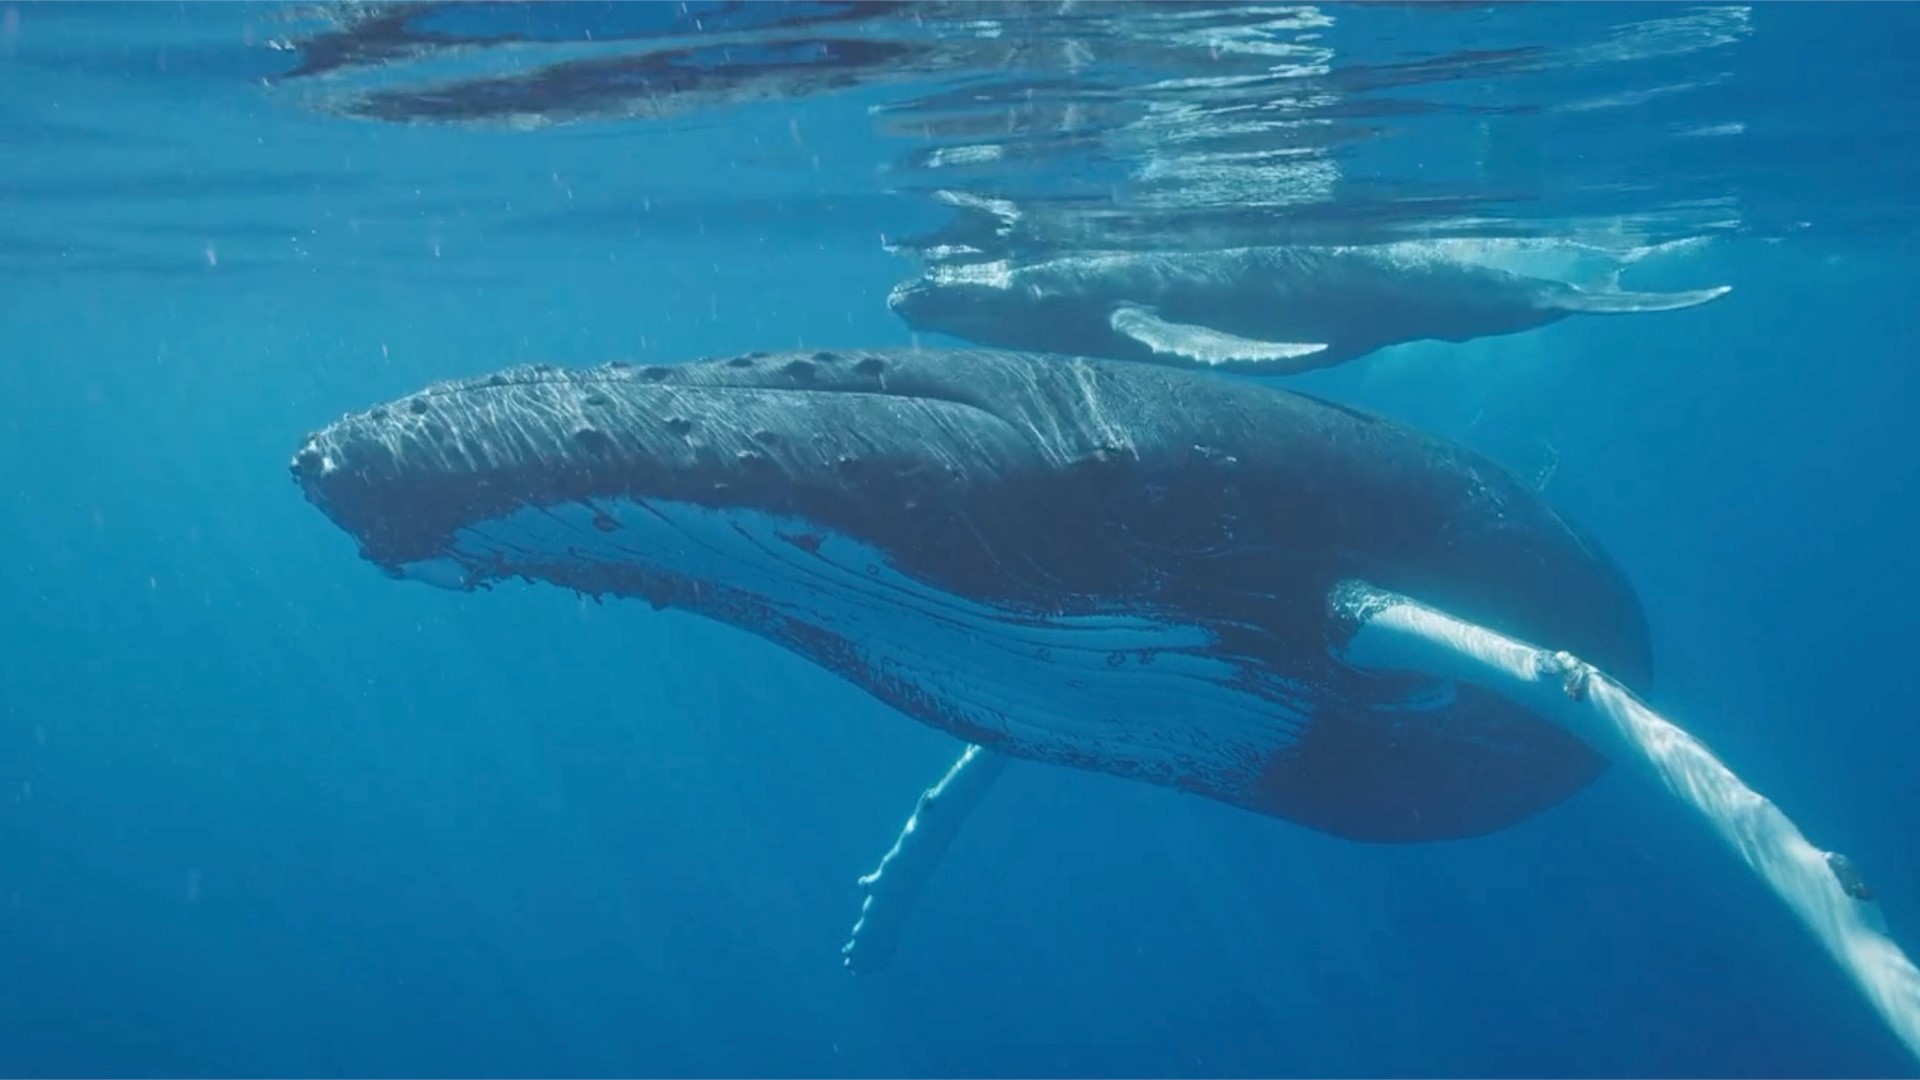 Humans need submersibles, but whales are fine without them.